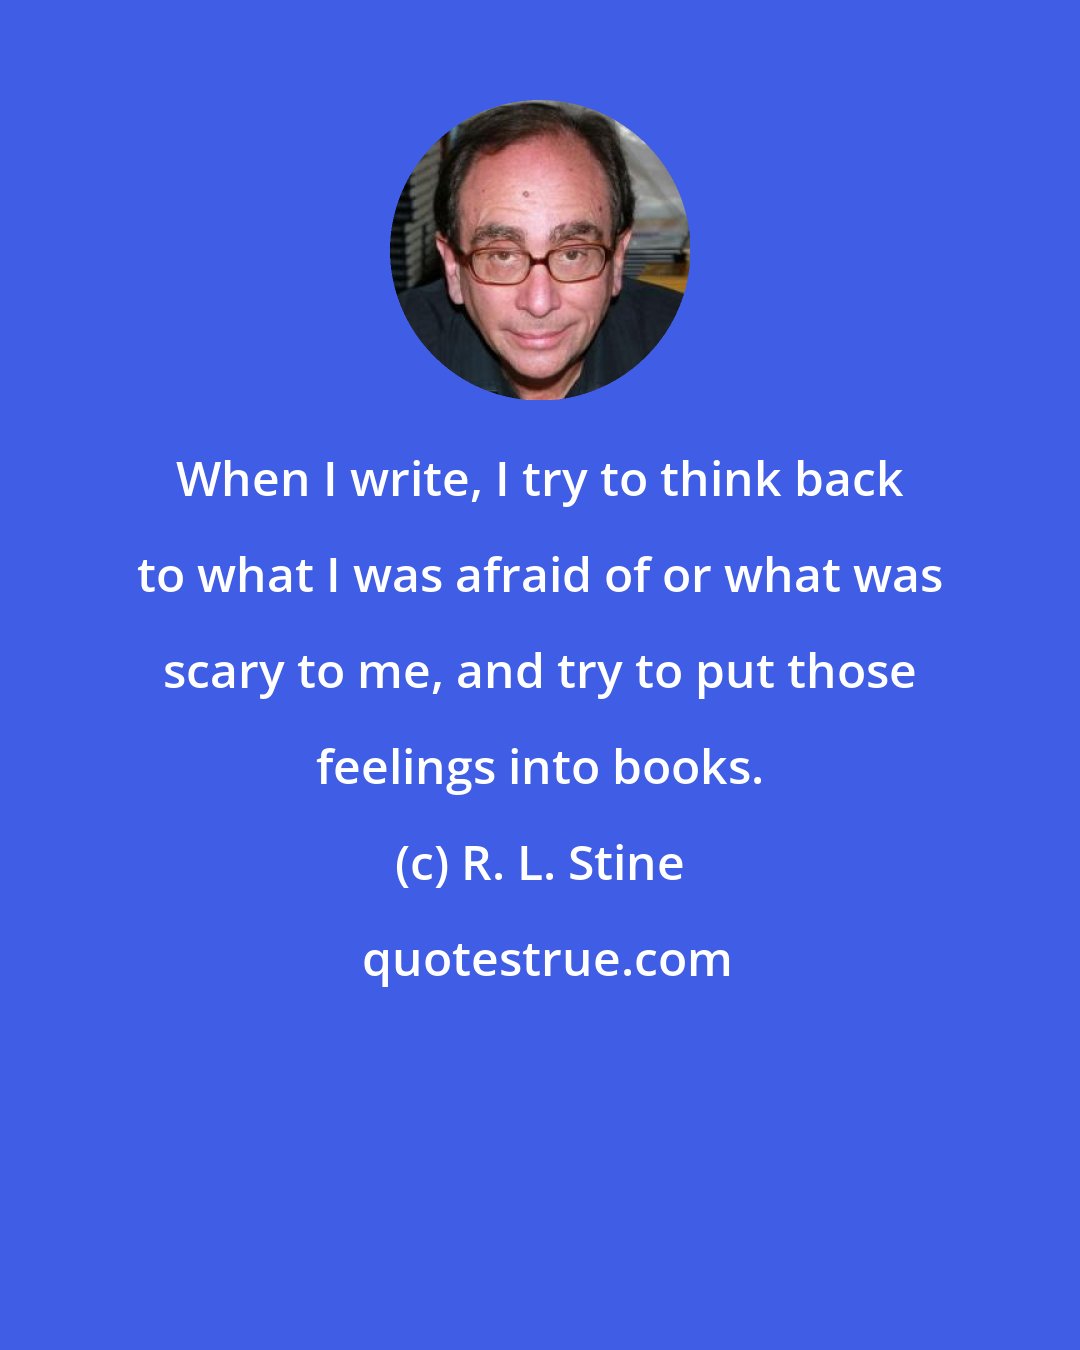 R. L. Stine: When I write, I try to think back to what I was afraid of or what was scary to me, and try to put those feelings into books.